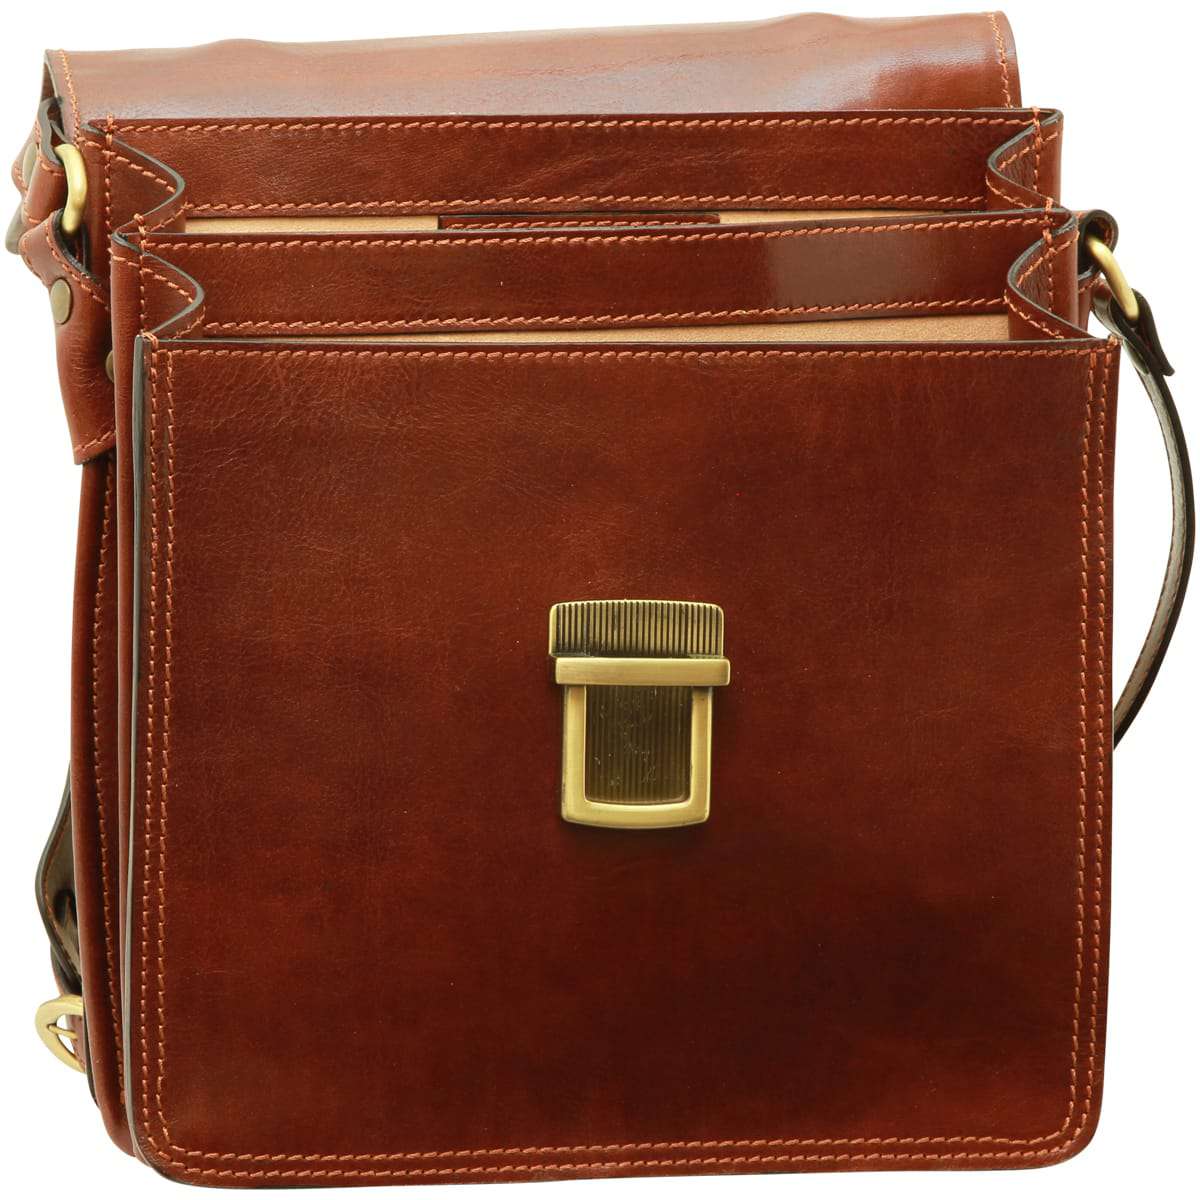 Leather Cross Body Satchel Bag - Brown | 056505MA | EURO | Old Angler Firenze